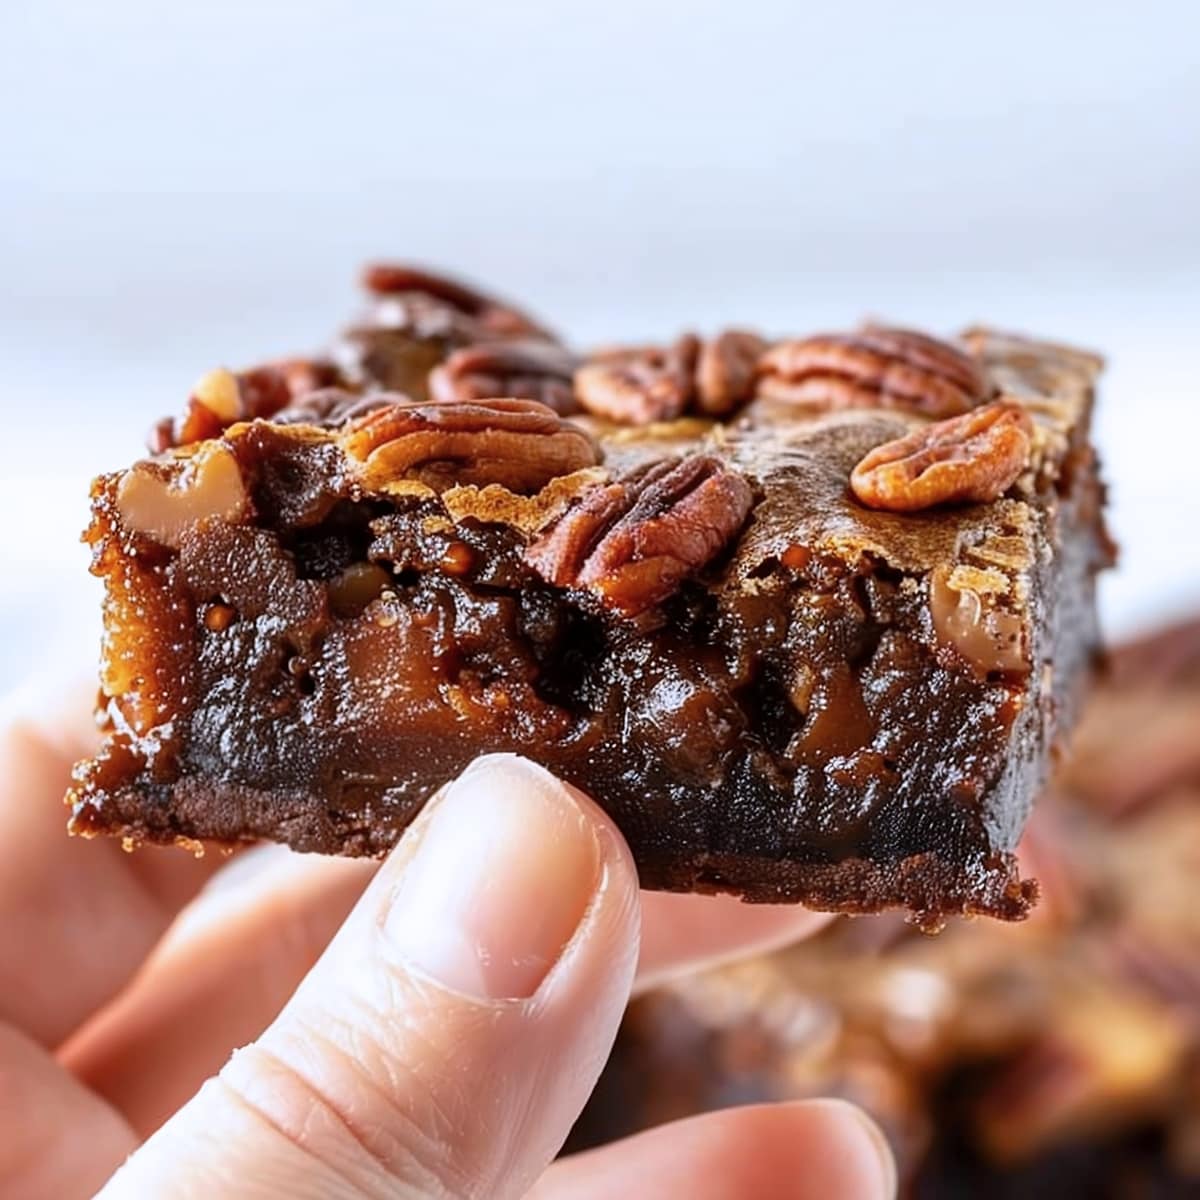 A hand holding up a brownie with pecans